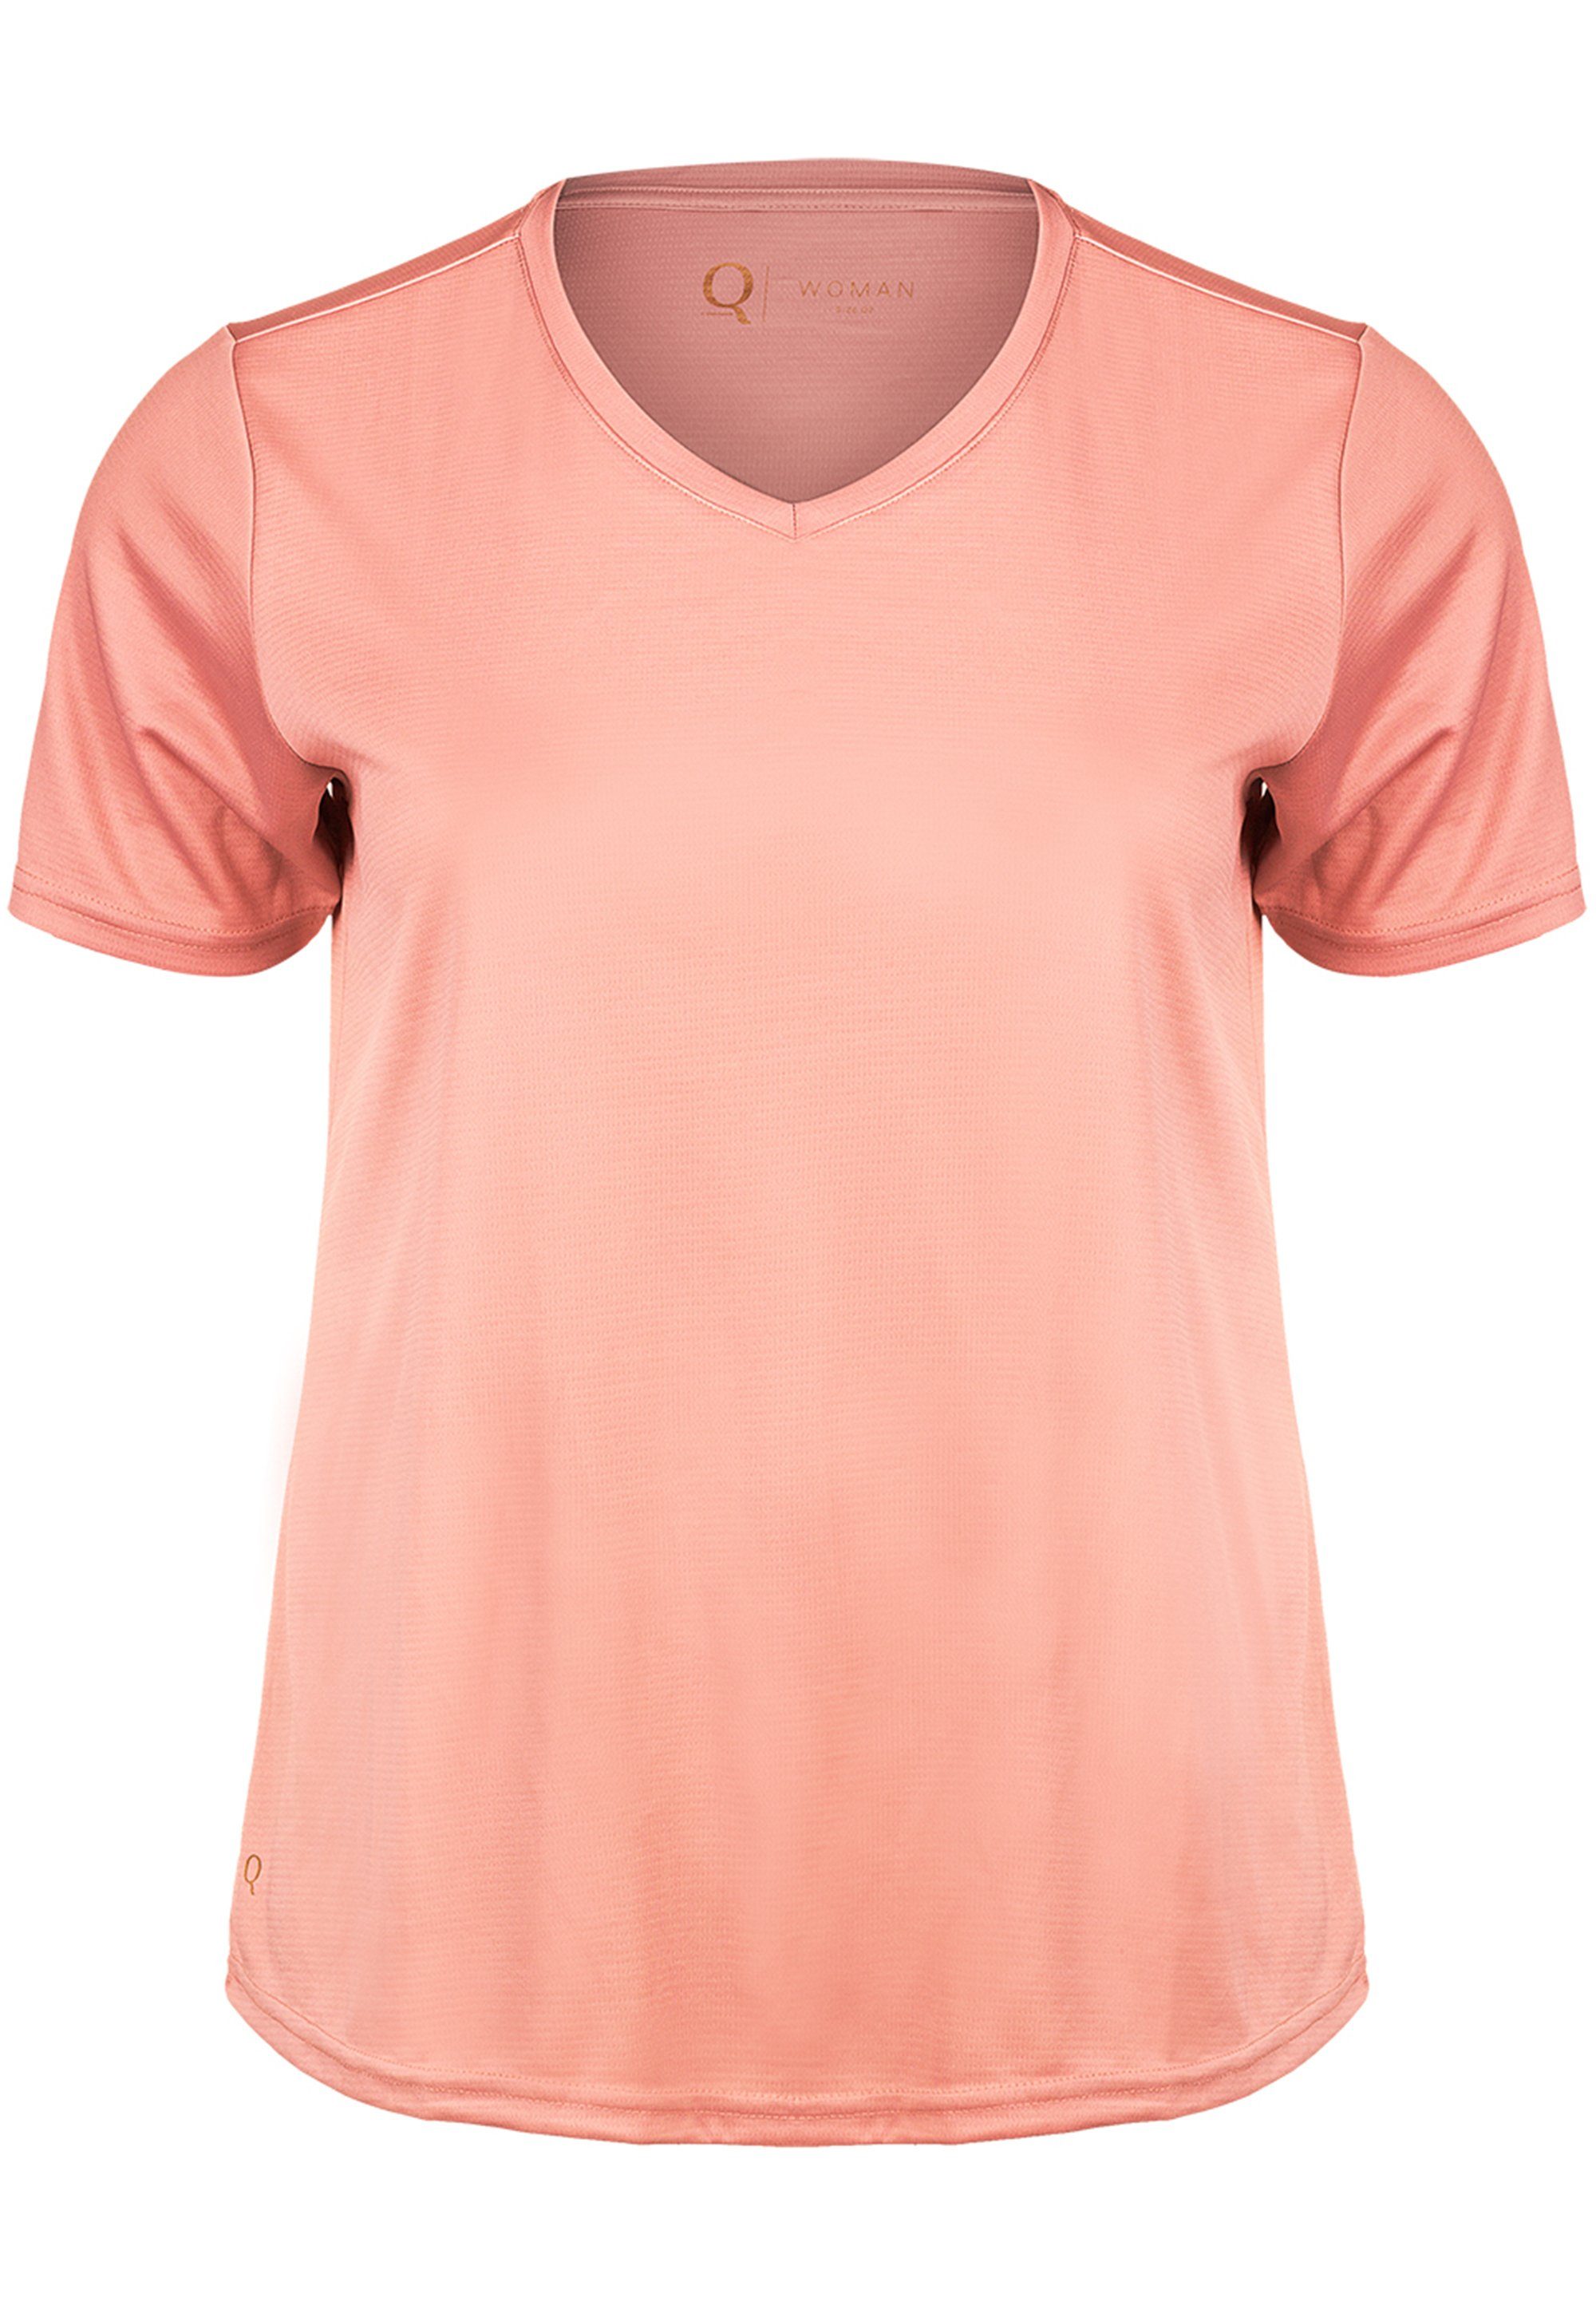 (1-tlg) ANNABELLE Q by Endurance Funktionsshirt QUICK mit rosa-pastell DRY-Technologie